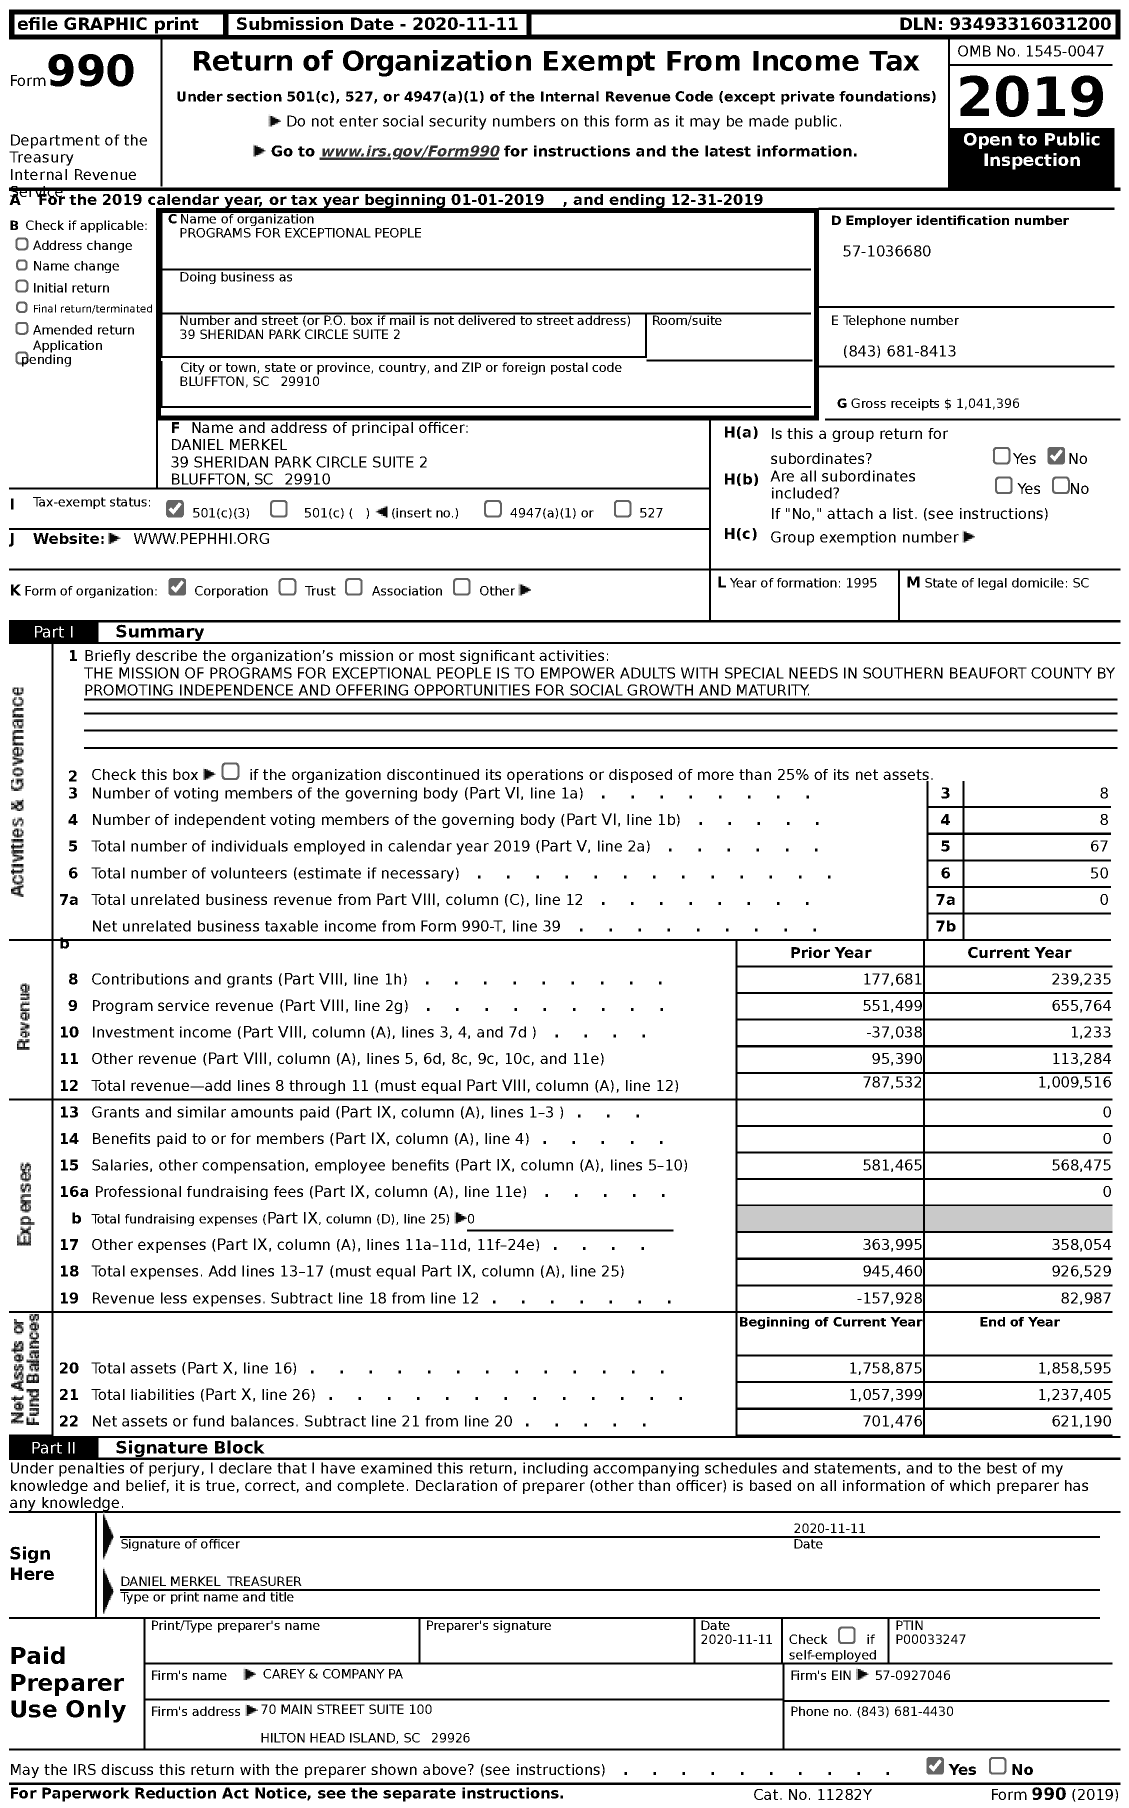 Image of first page of 2019 Form 990 for Programs for Exceptional People